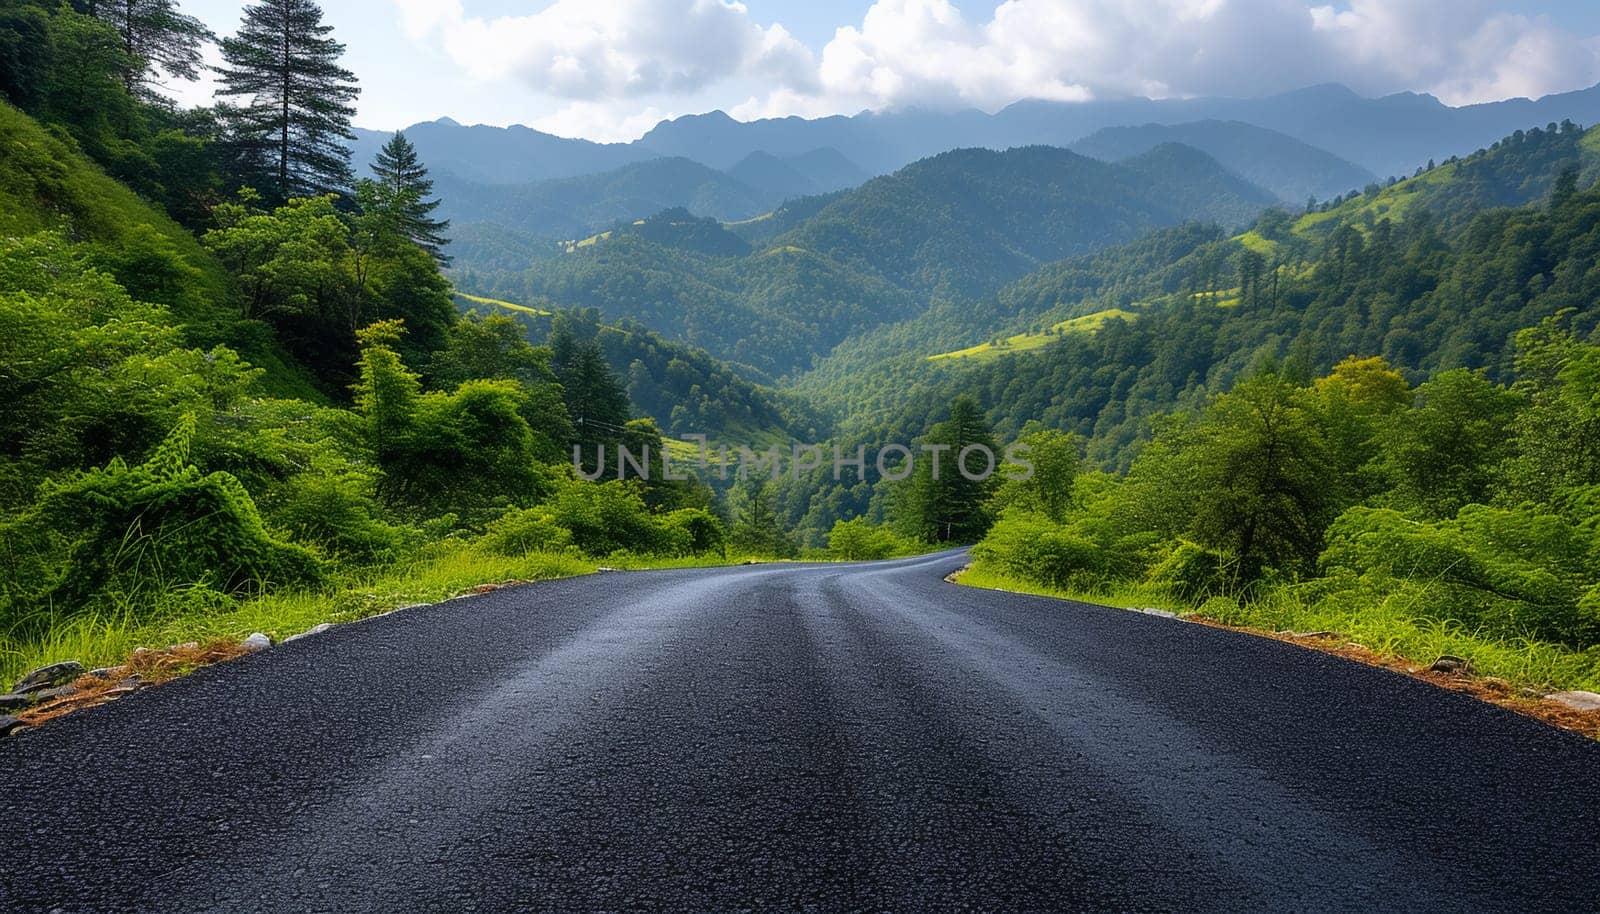 The prospect of a road stretching into the distance, against the background of nature. High quality photo